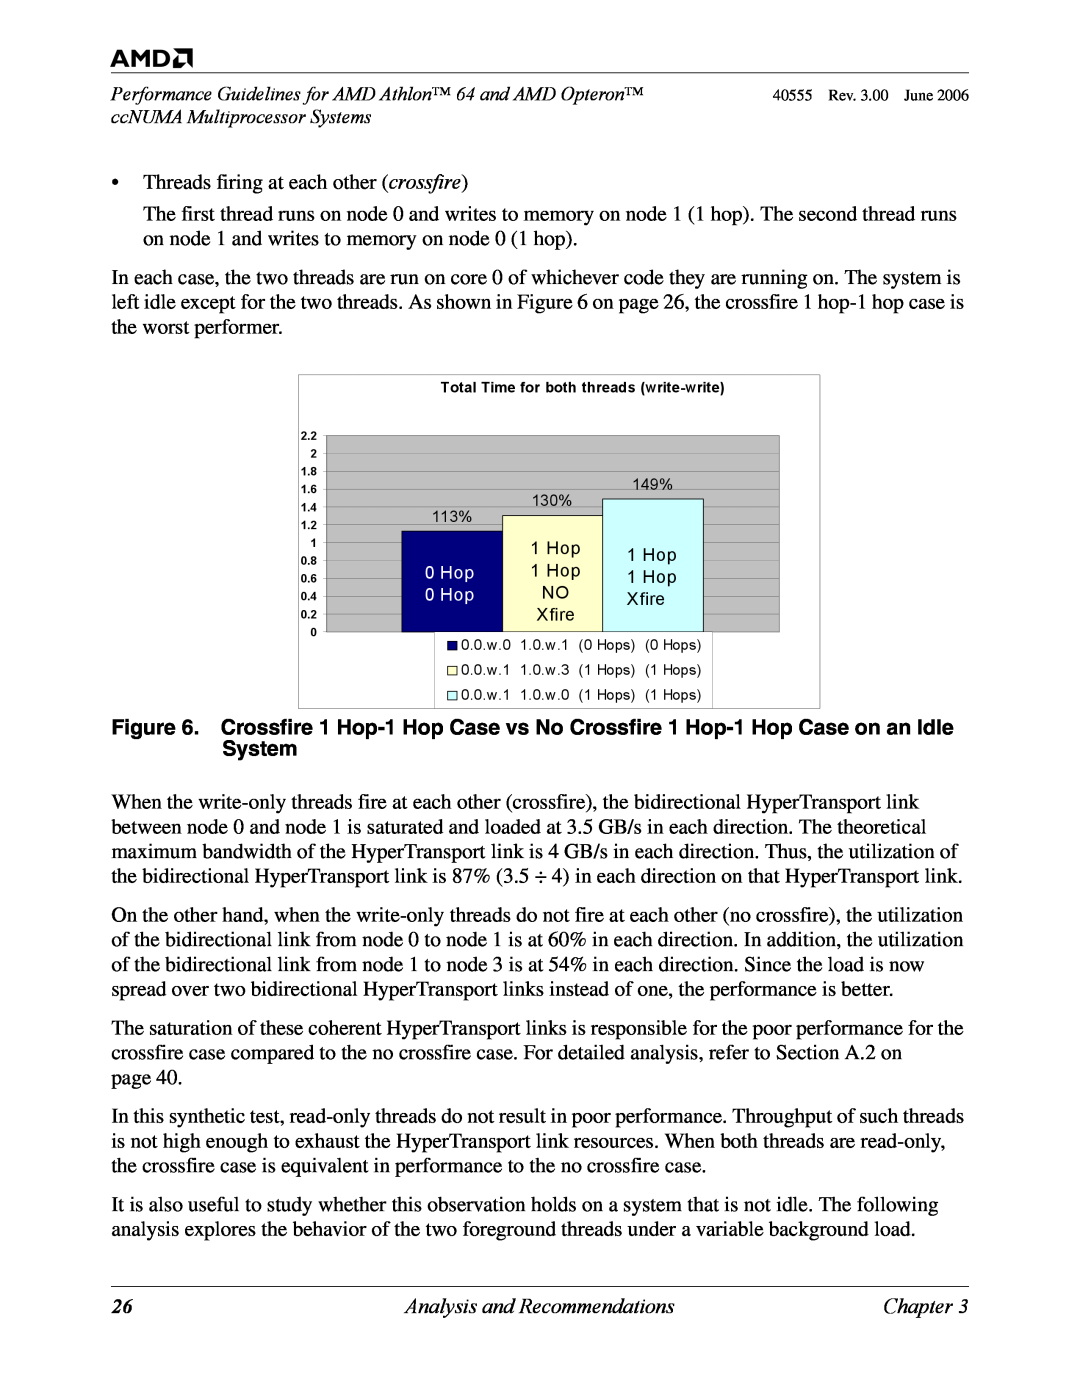 AMD 64 manual Threads firing at each other crossfire, Analysis and Recommendations 